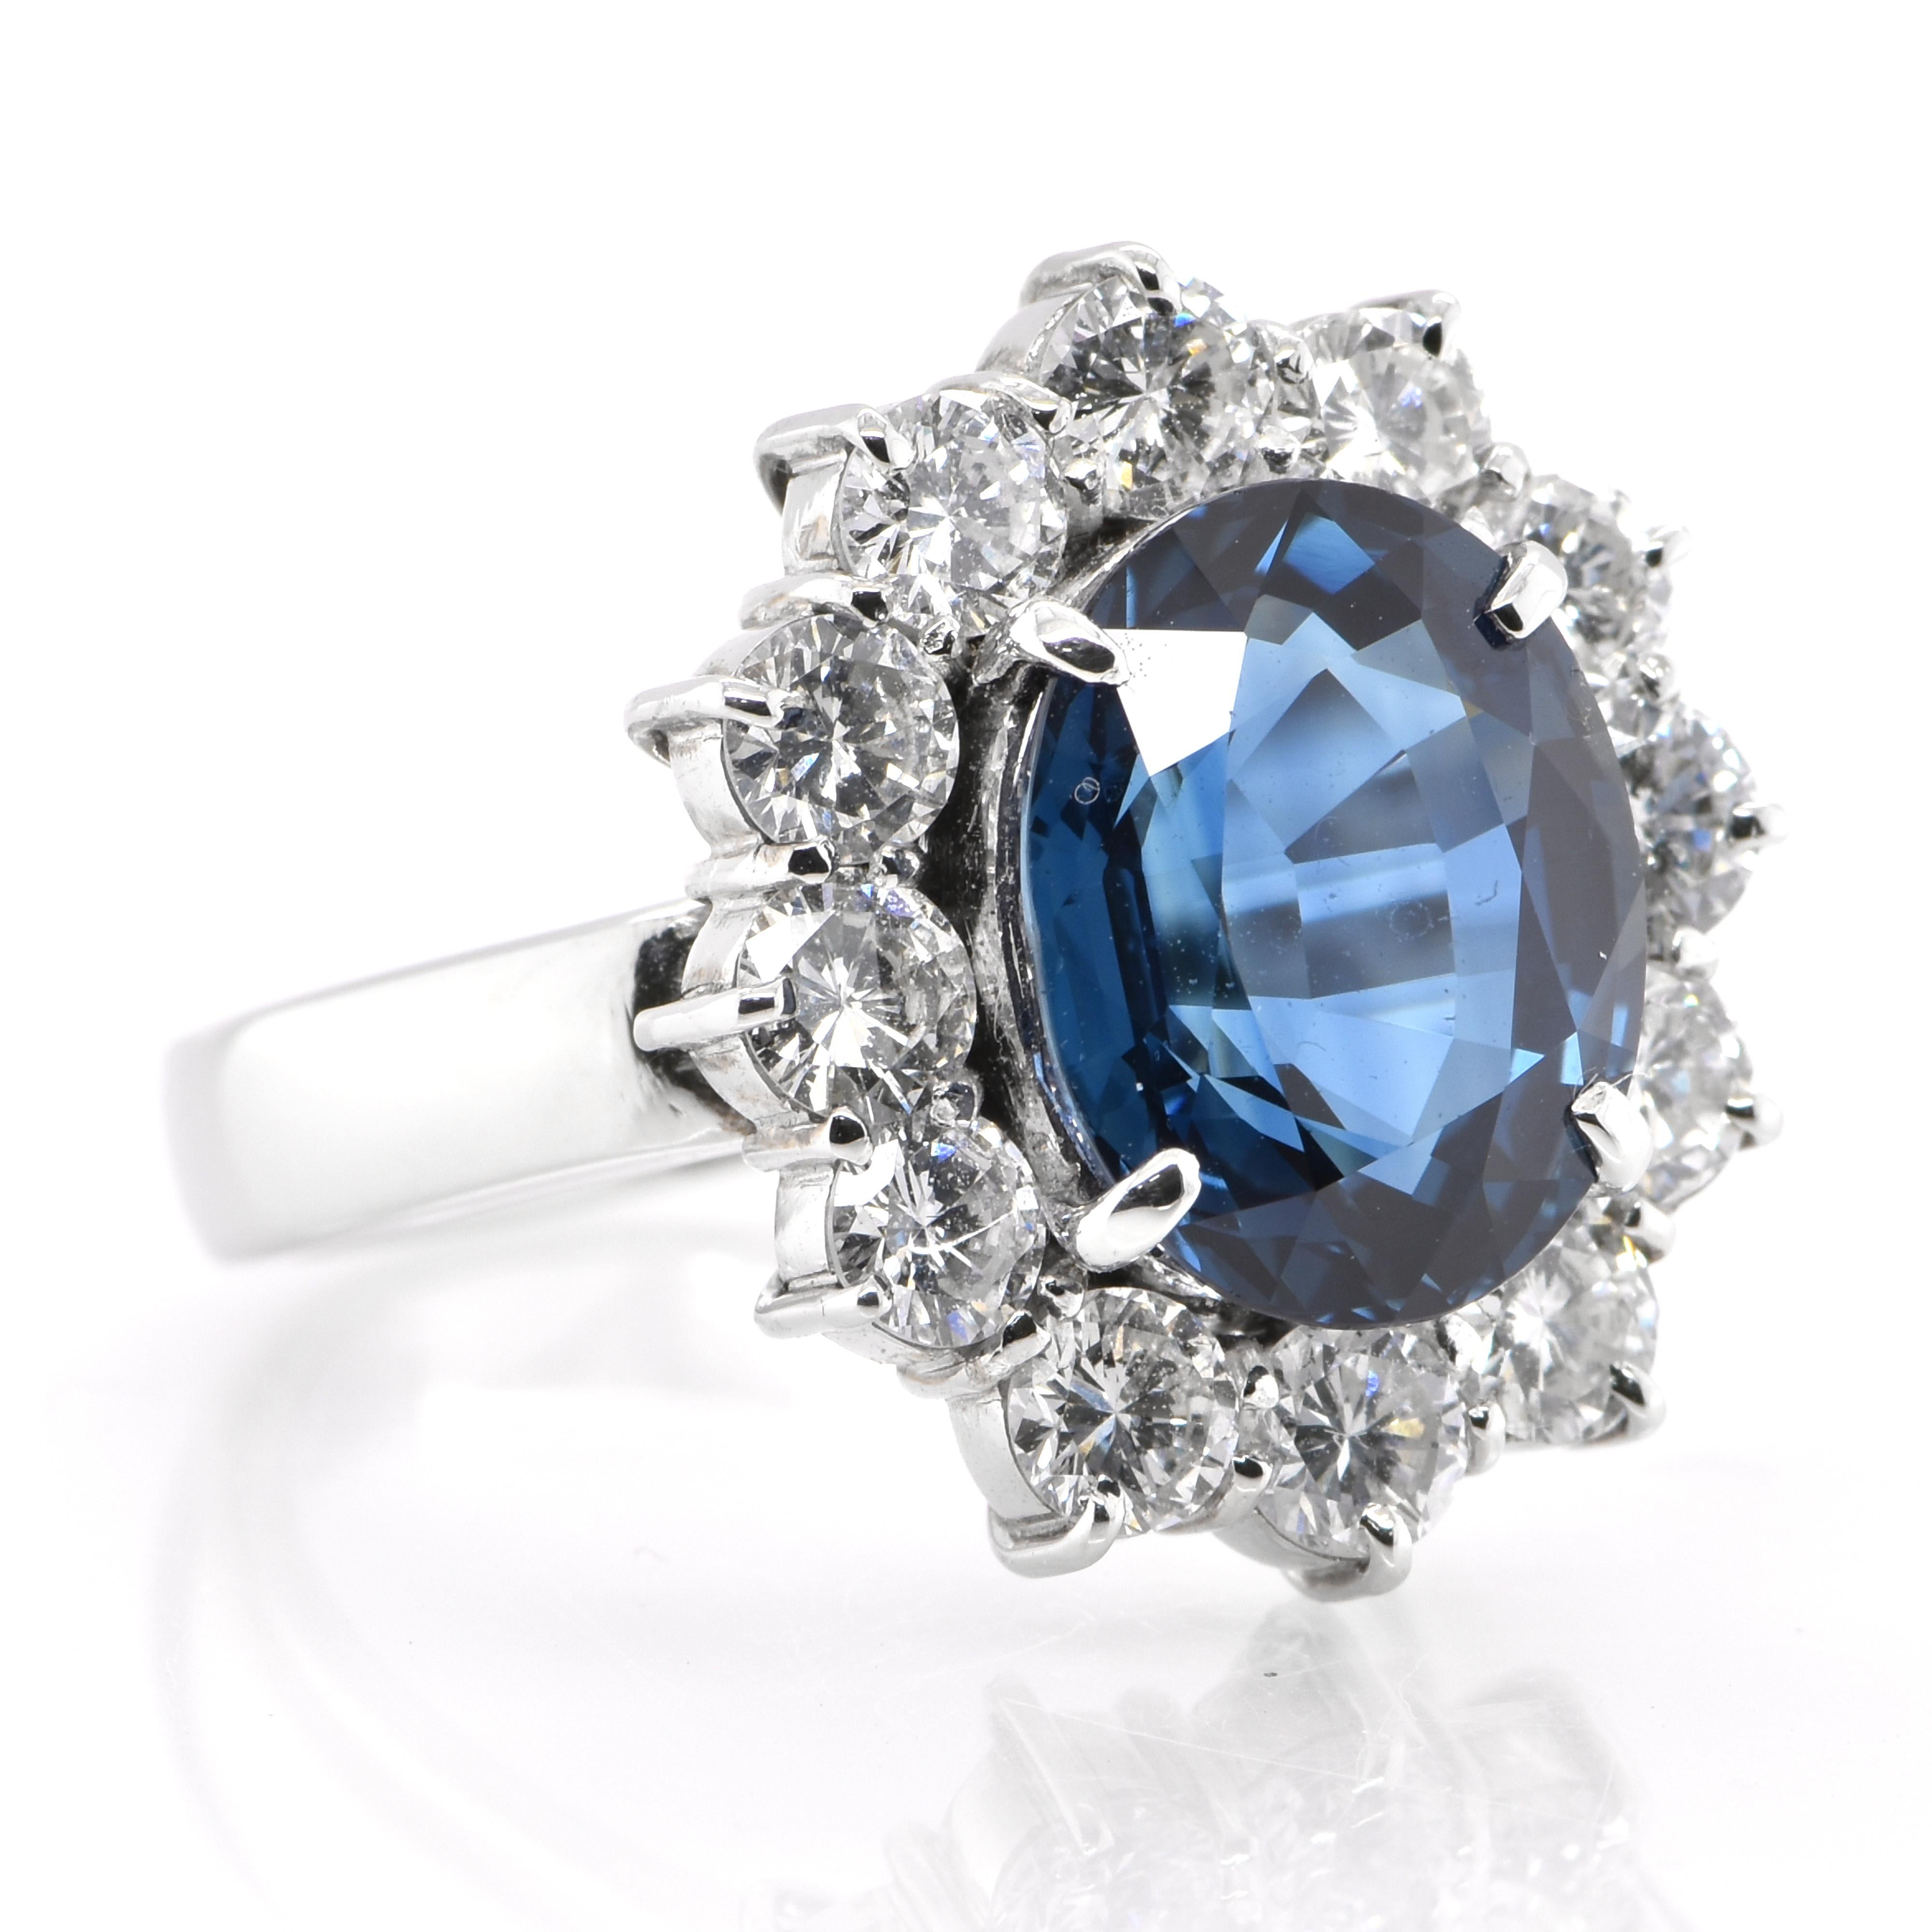 Modern 5.96 Carat Natural Sapphire and Diamond Cocktail Ring Set in Platinum